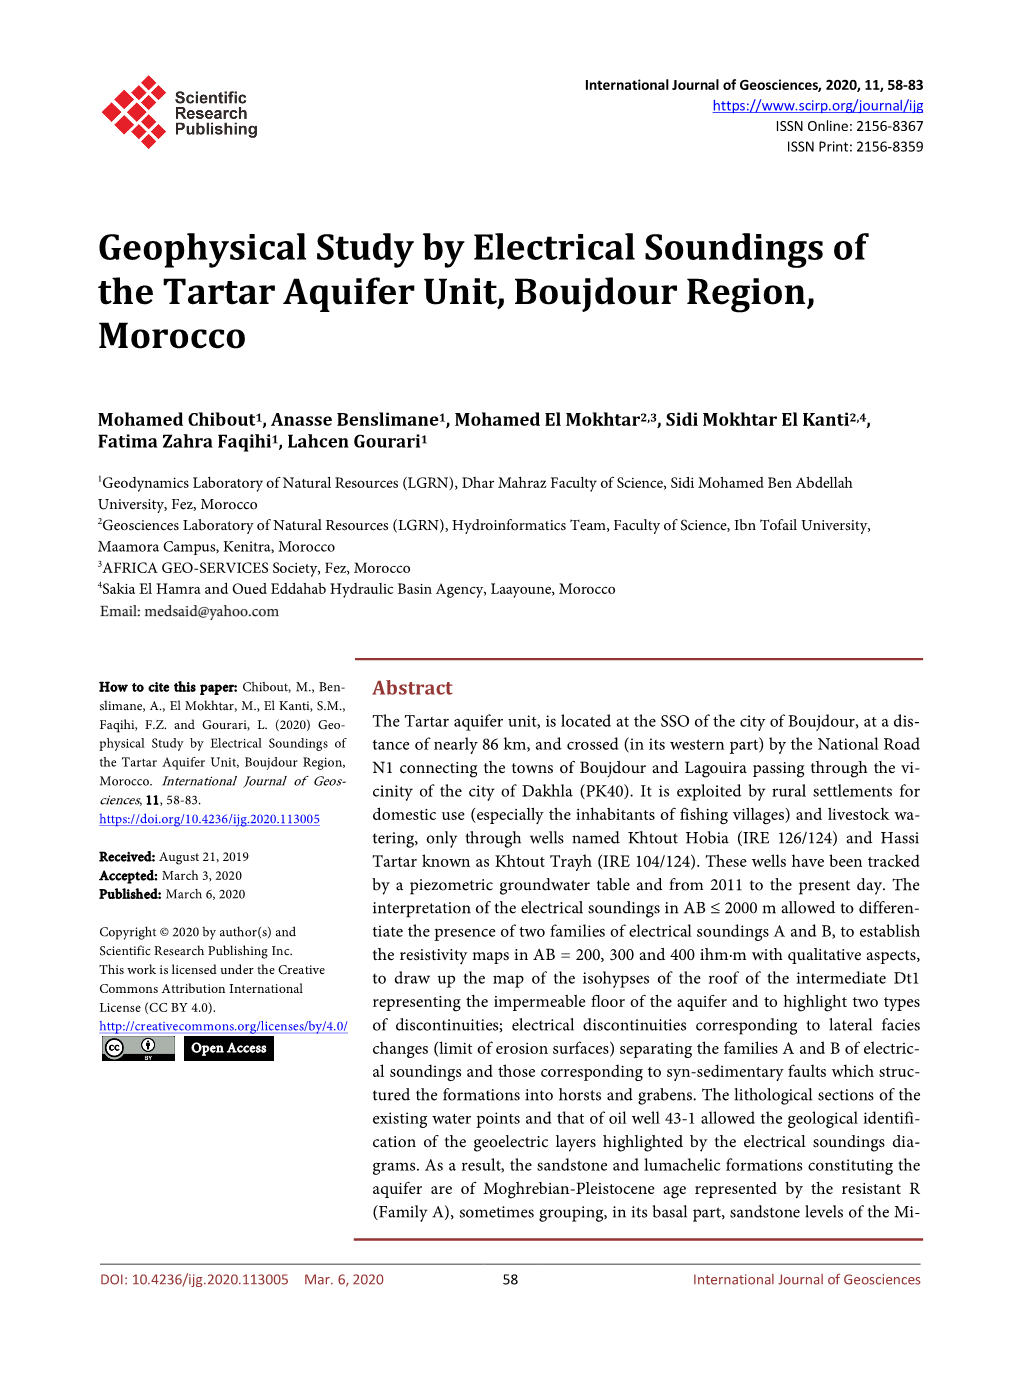 Geophysical Study by Electrical Soundings of the Tartar Aquifer Unit, Boujdour Region, Morocco